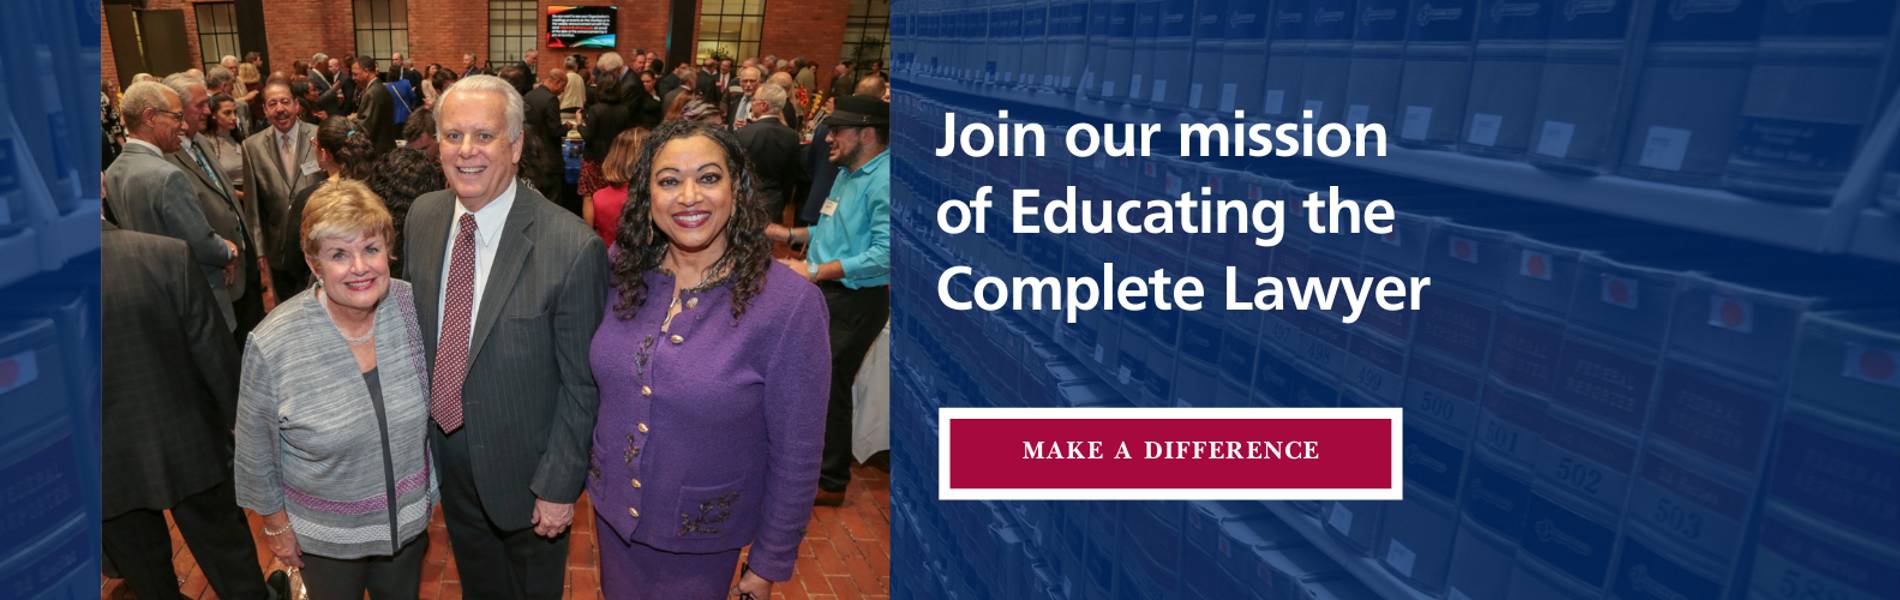 Join our mission in Educating the Complete Lawyer